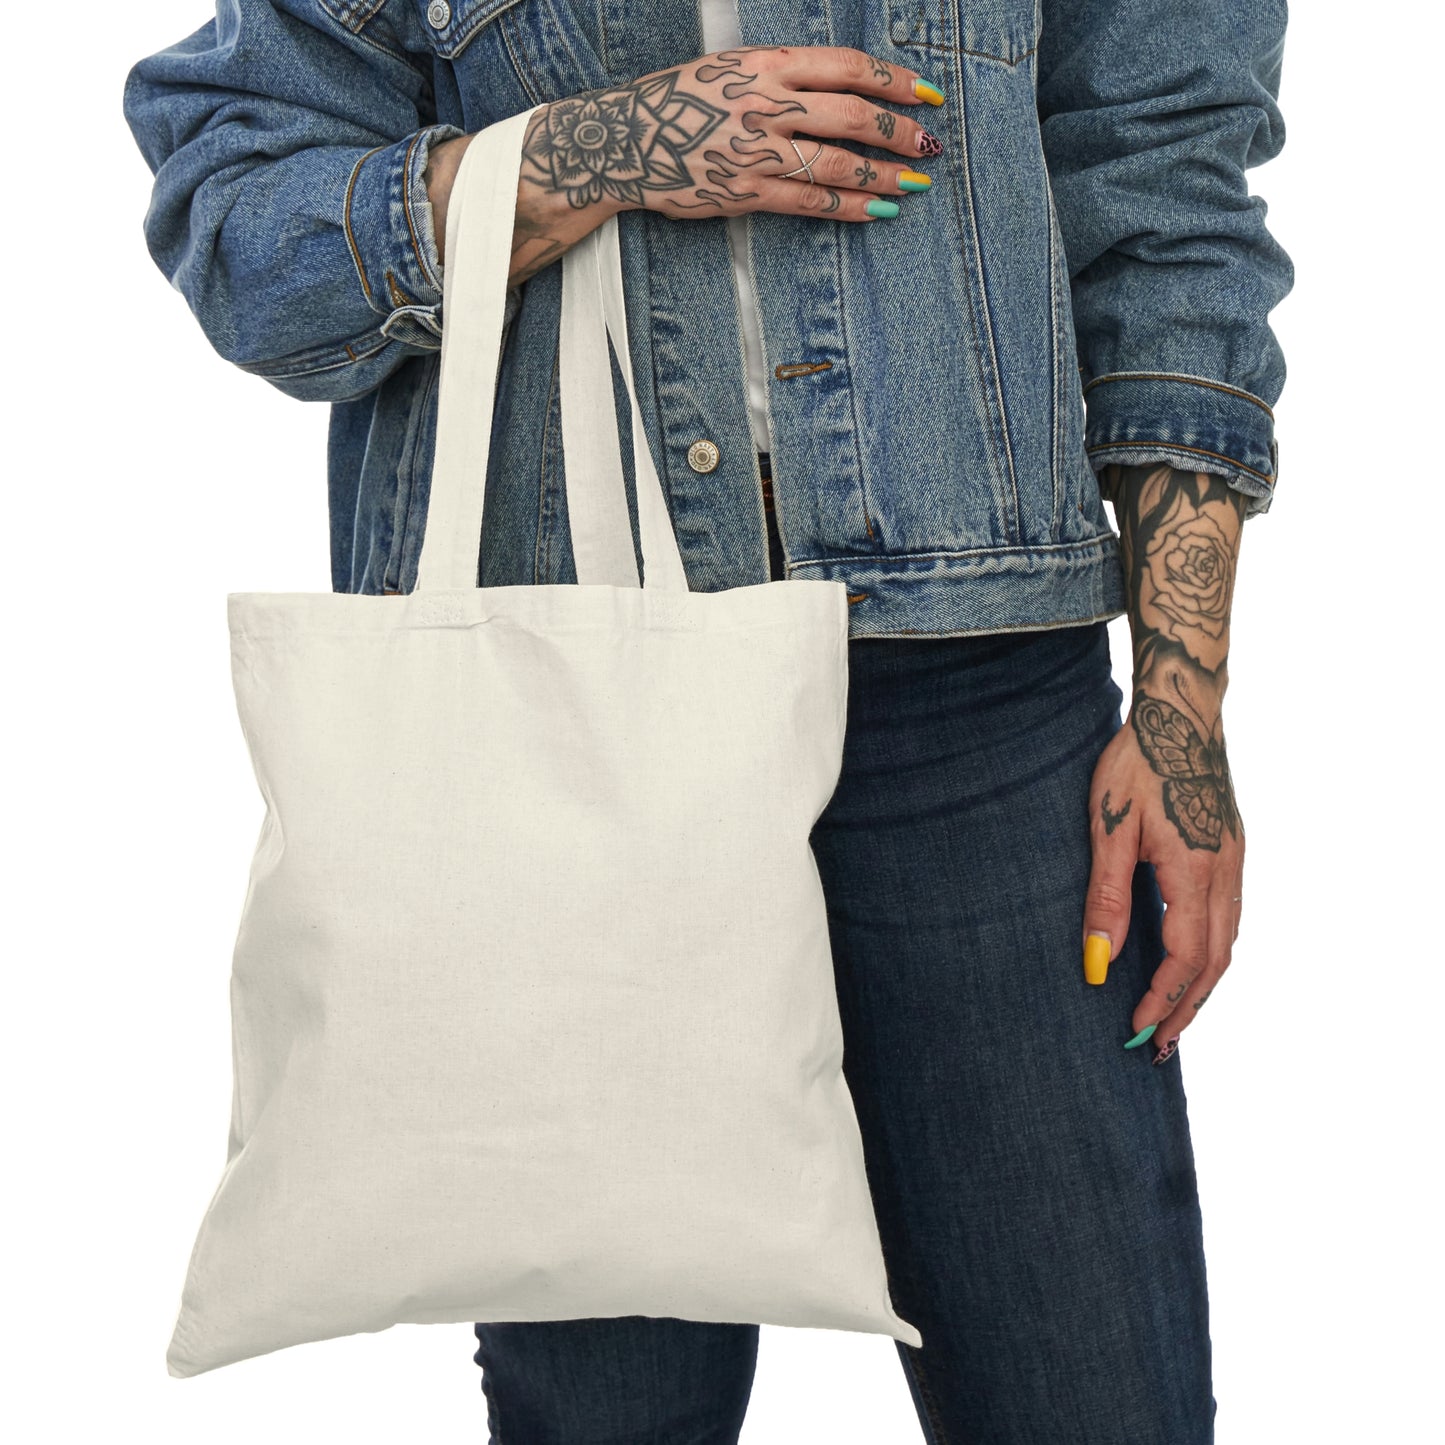 Knowledge Protects - Natural Tote Bag